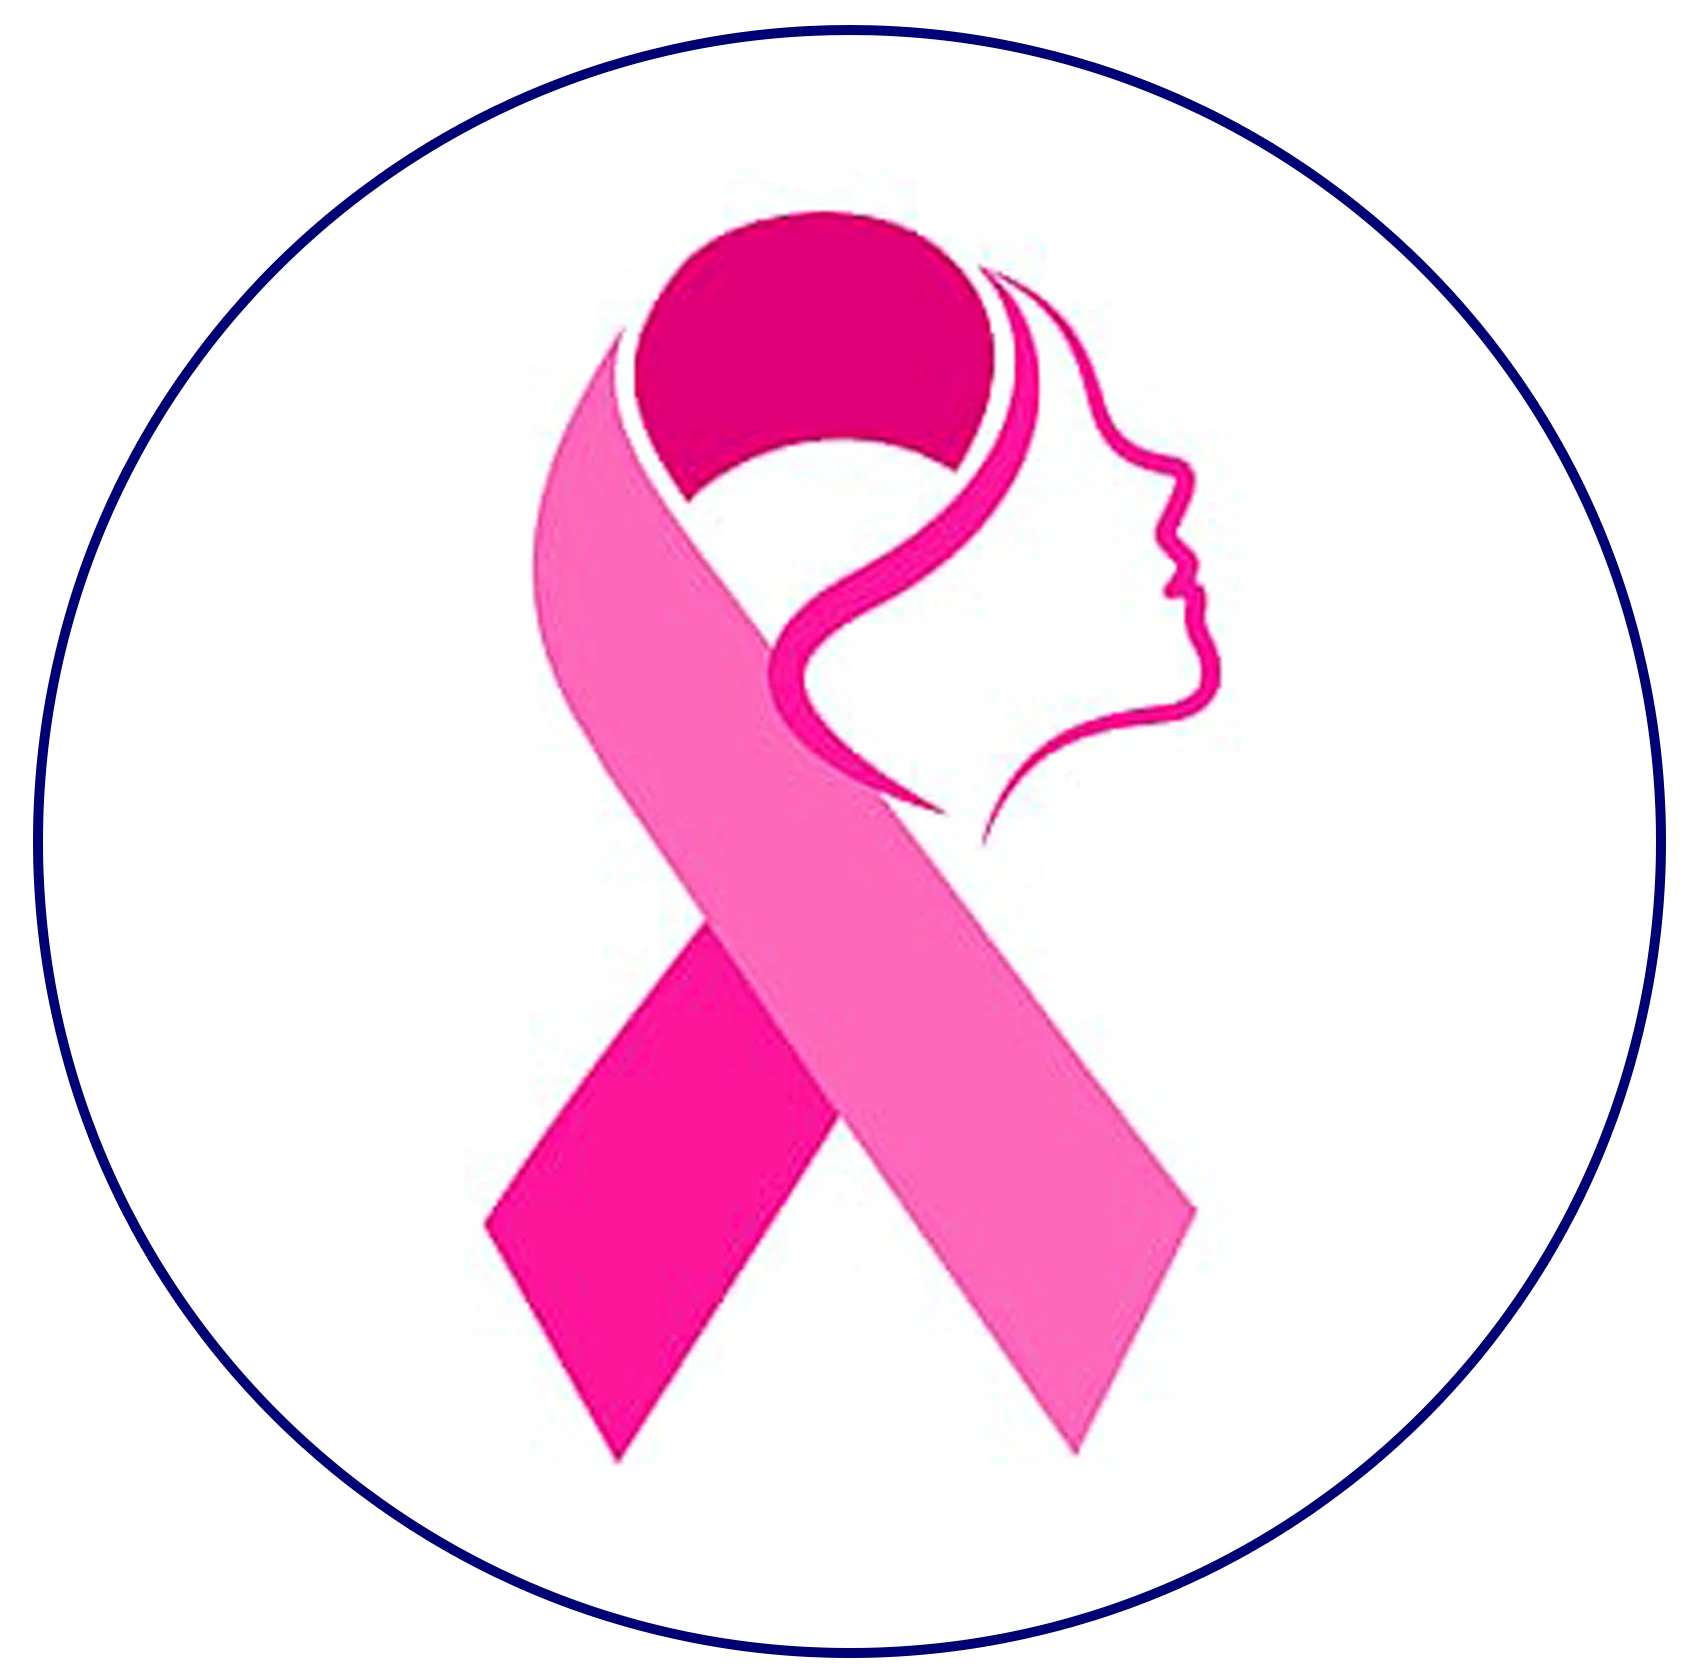 Breast cancer awareness ribbon with a pink background